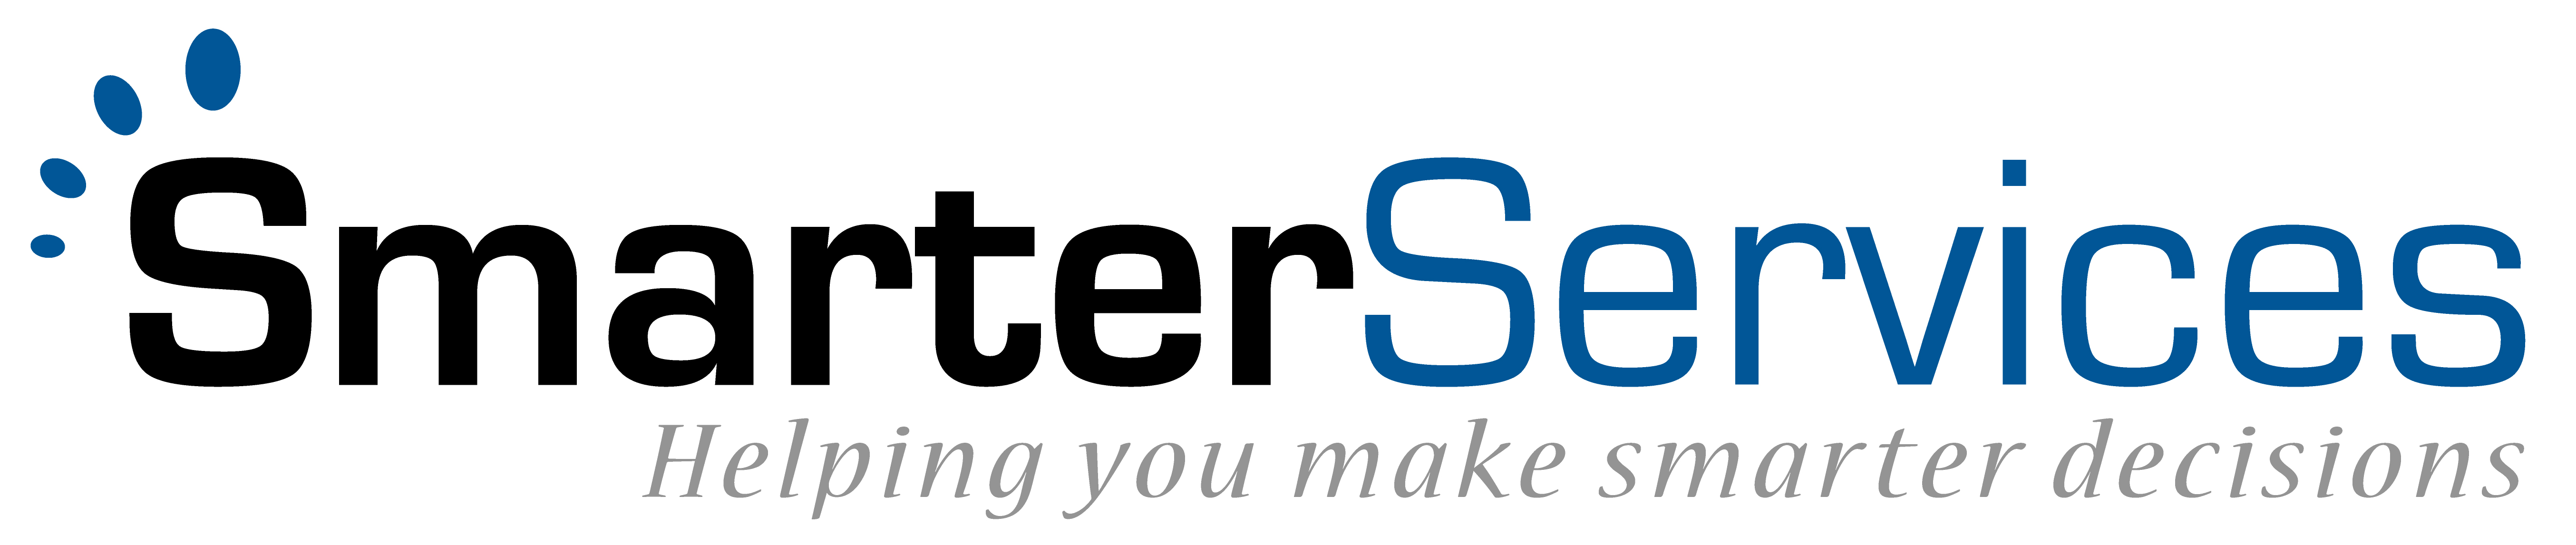 smarterservices